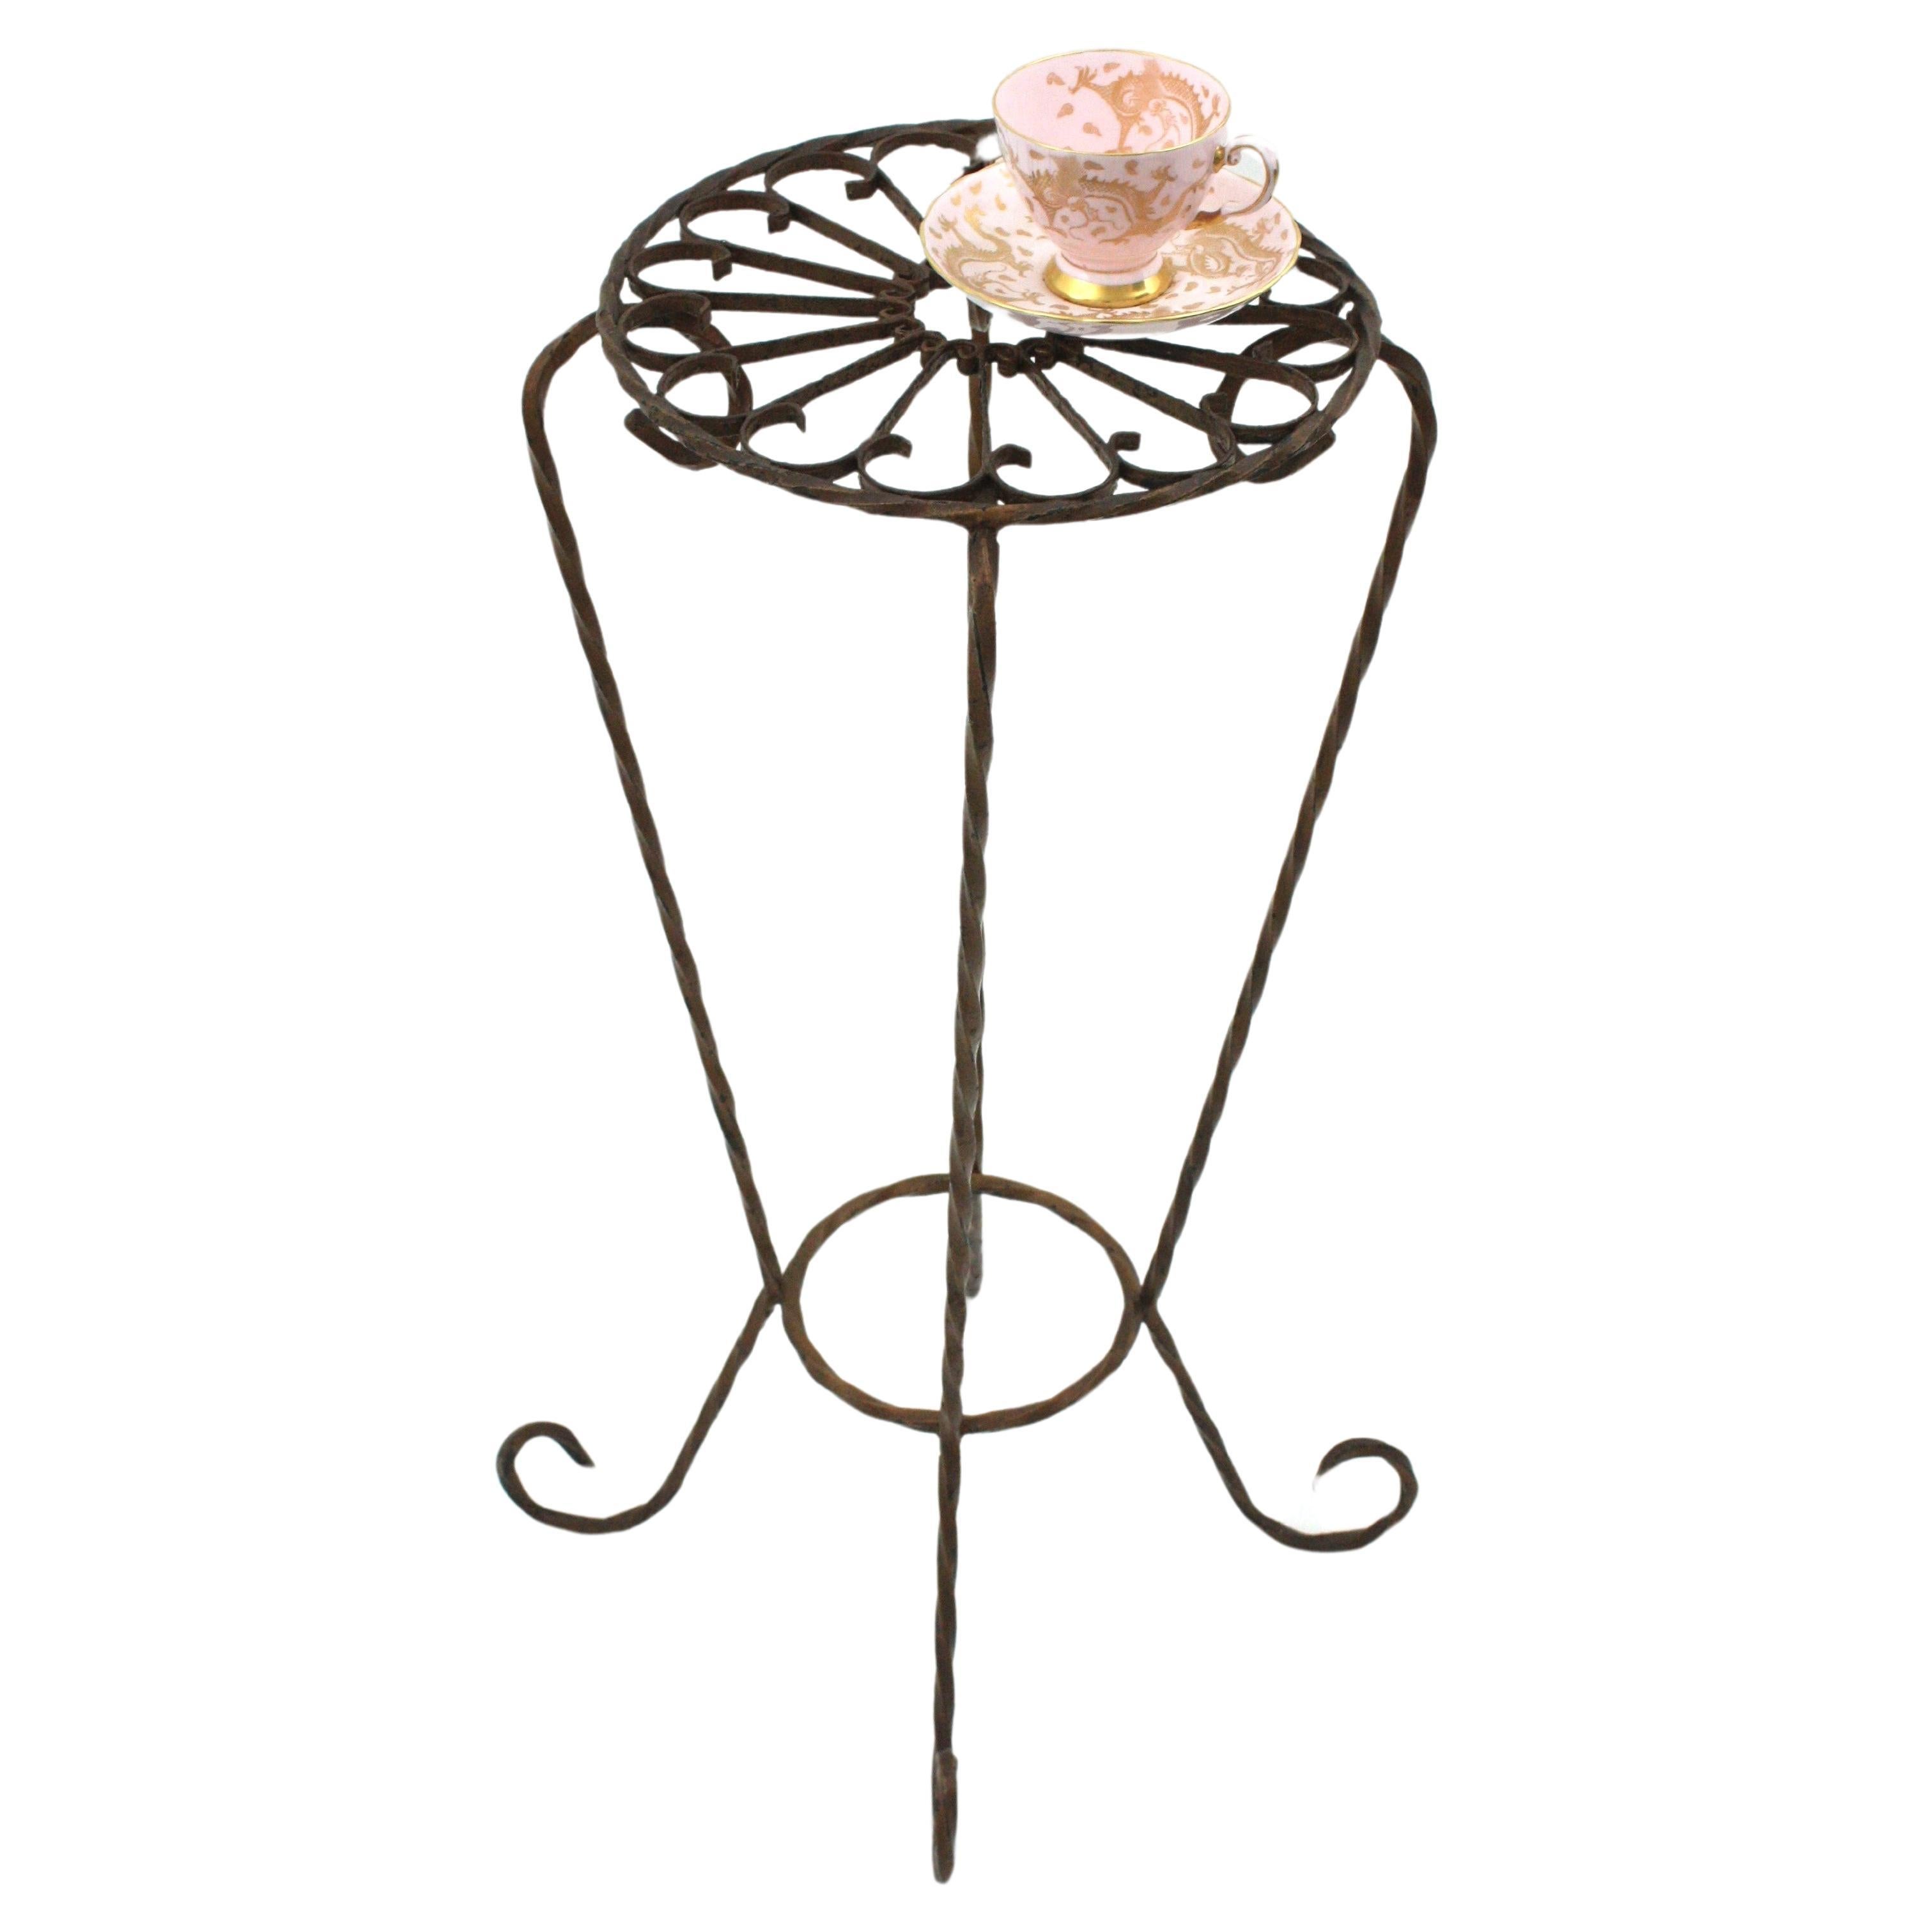 Forged Spanish Wrought Iron Side Table Gueridon / Drinks Table with Scrollwork Top For Sale